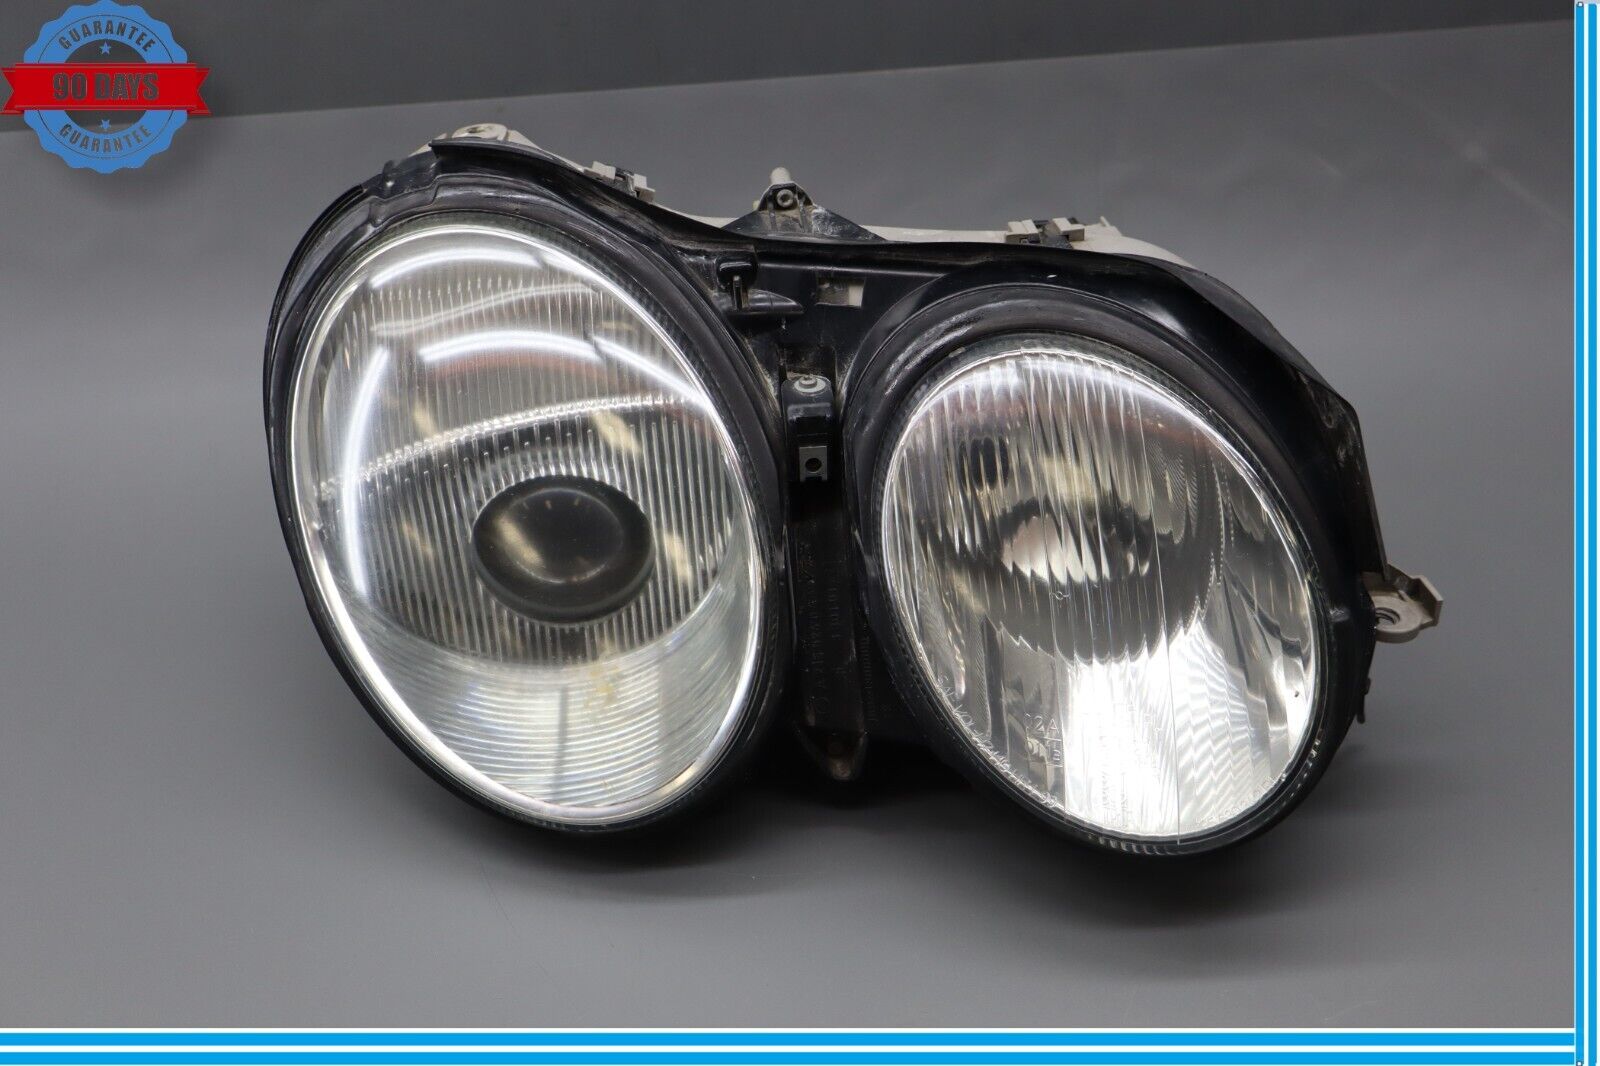 00-02 Mercedes W215 CL500 Front Right Side Headlight Head Light Lamp Xenon Oem